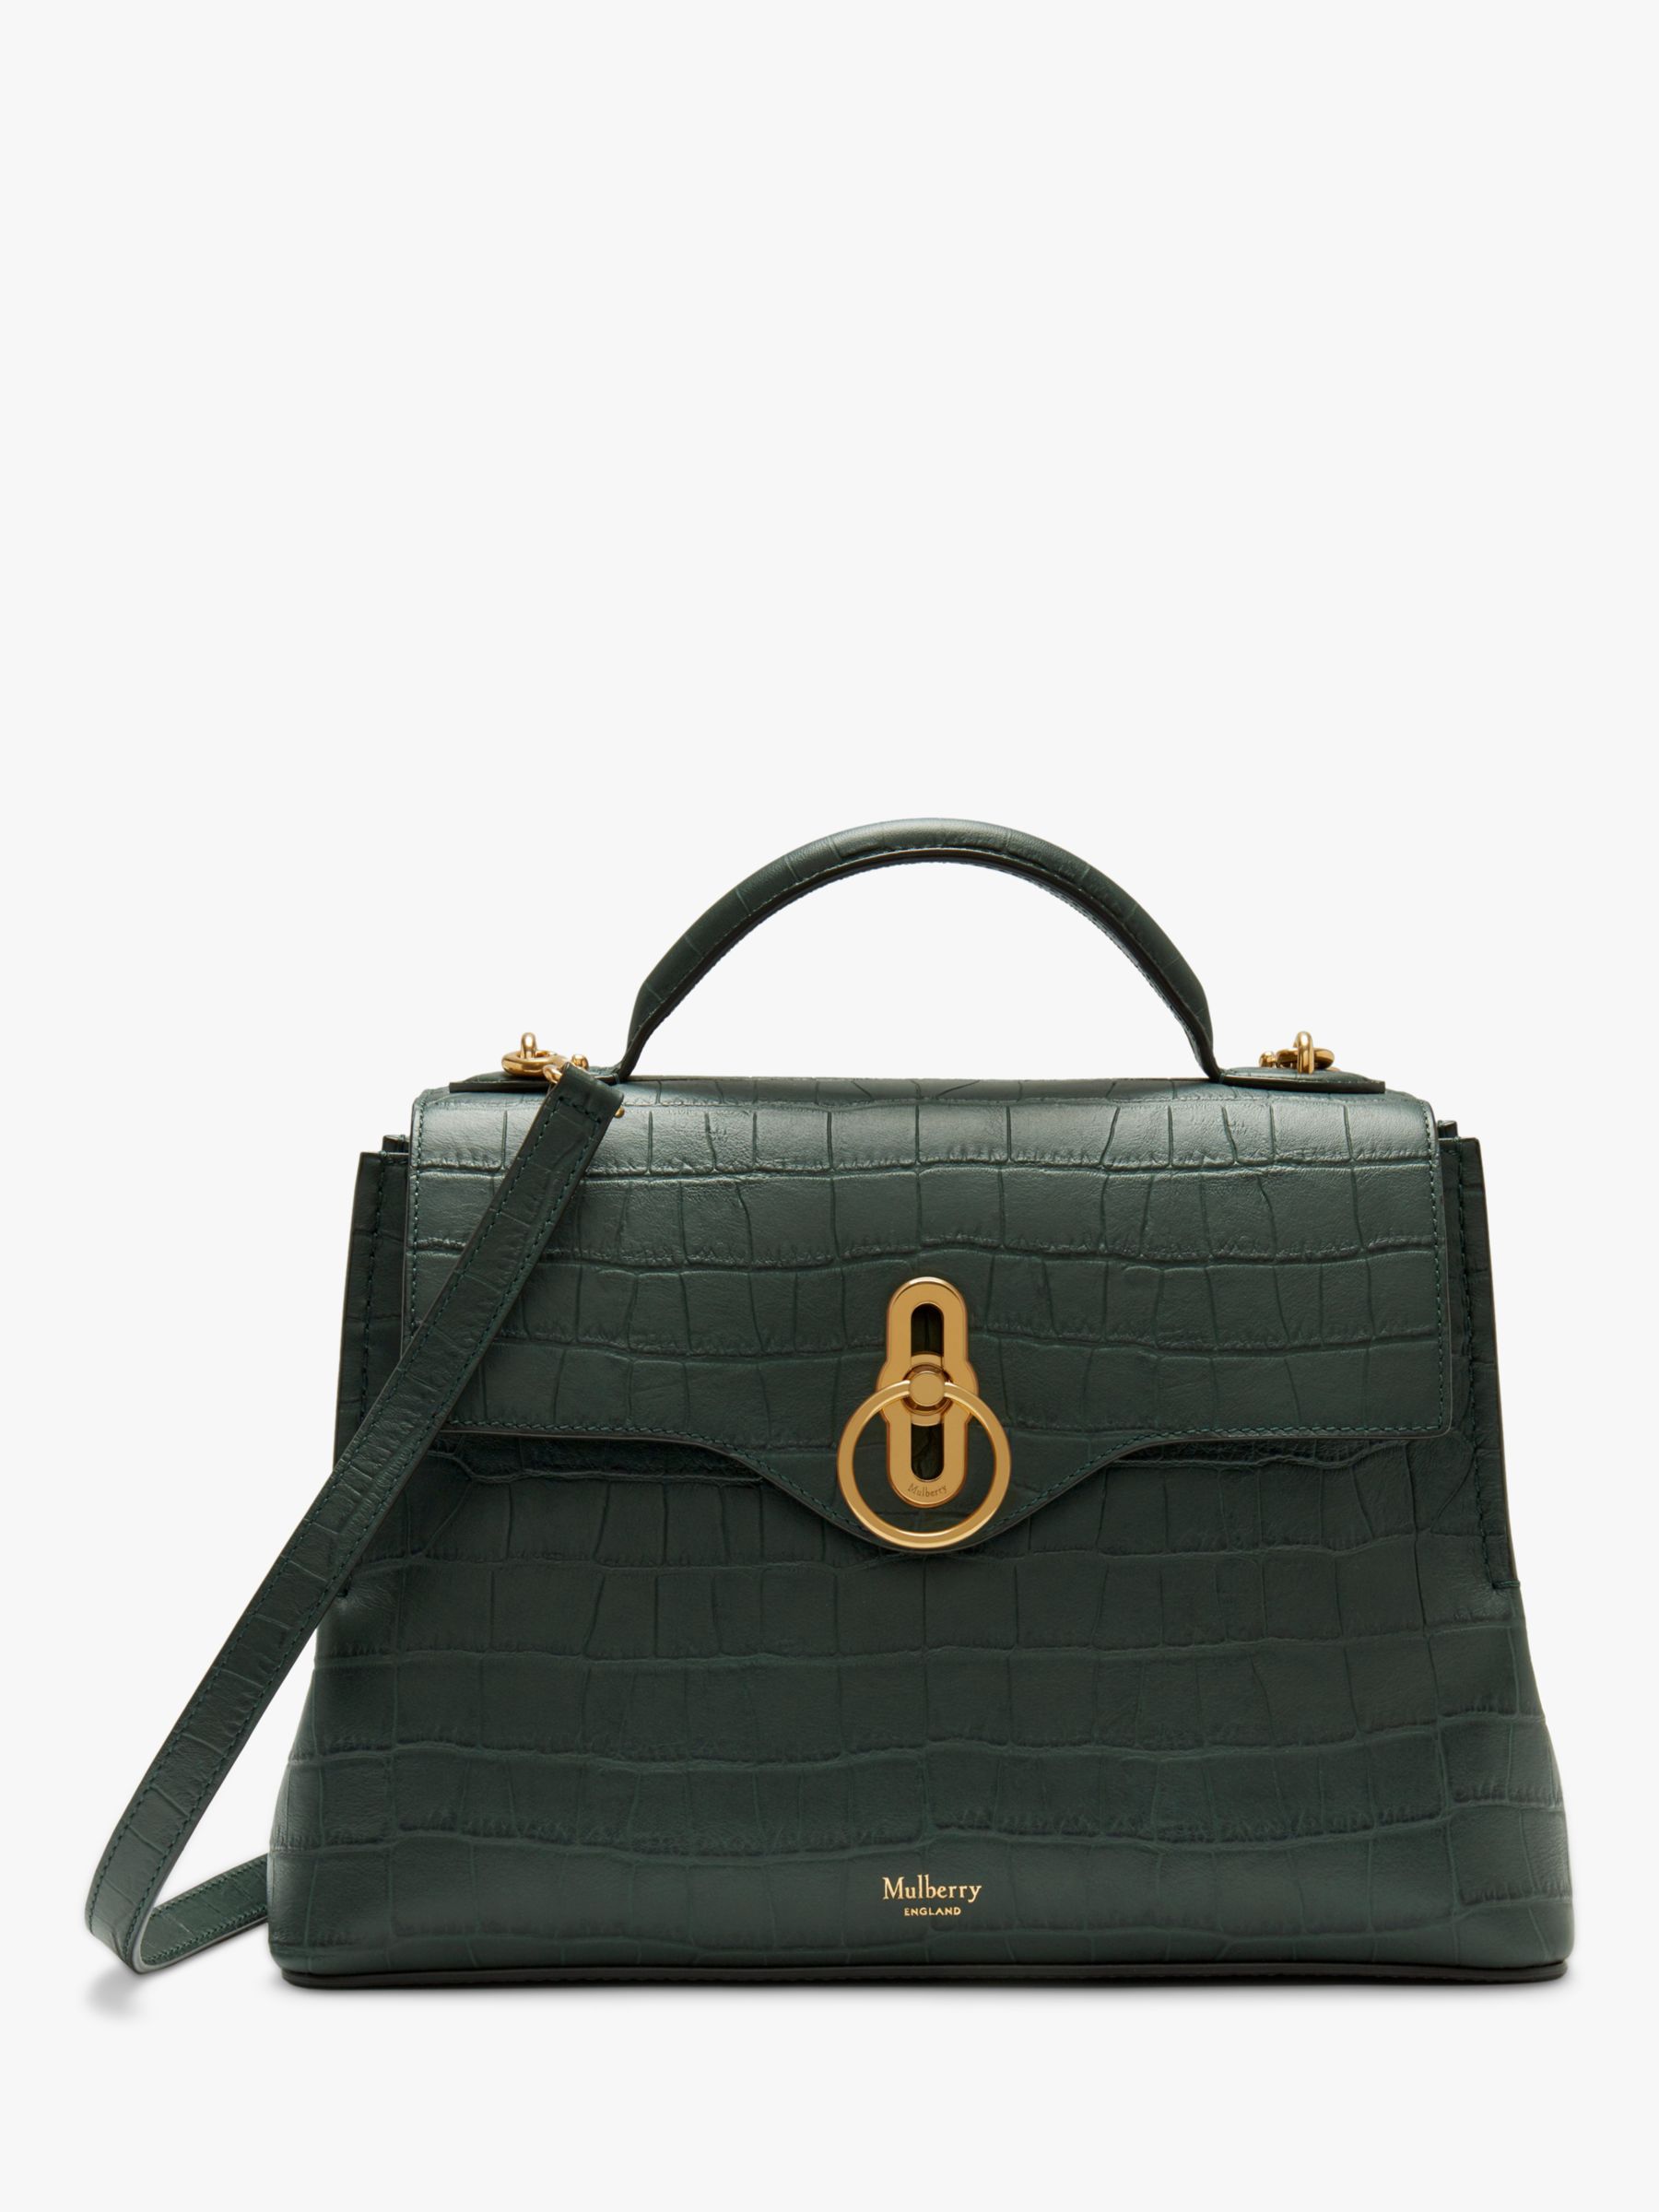 At understrege Diskret Robust Mulberry Micro Seaton In Jungle Green Shiny Croc Printed Calfskin SOLD |  nursery.com.pk